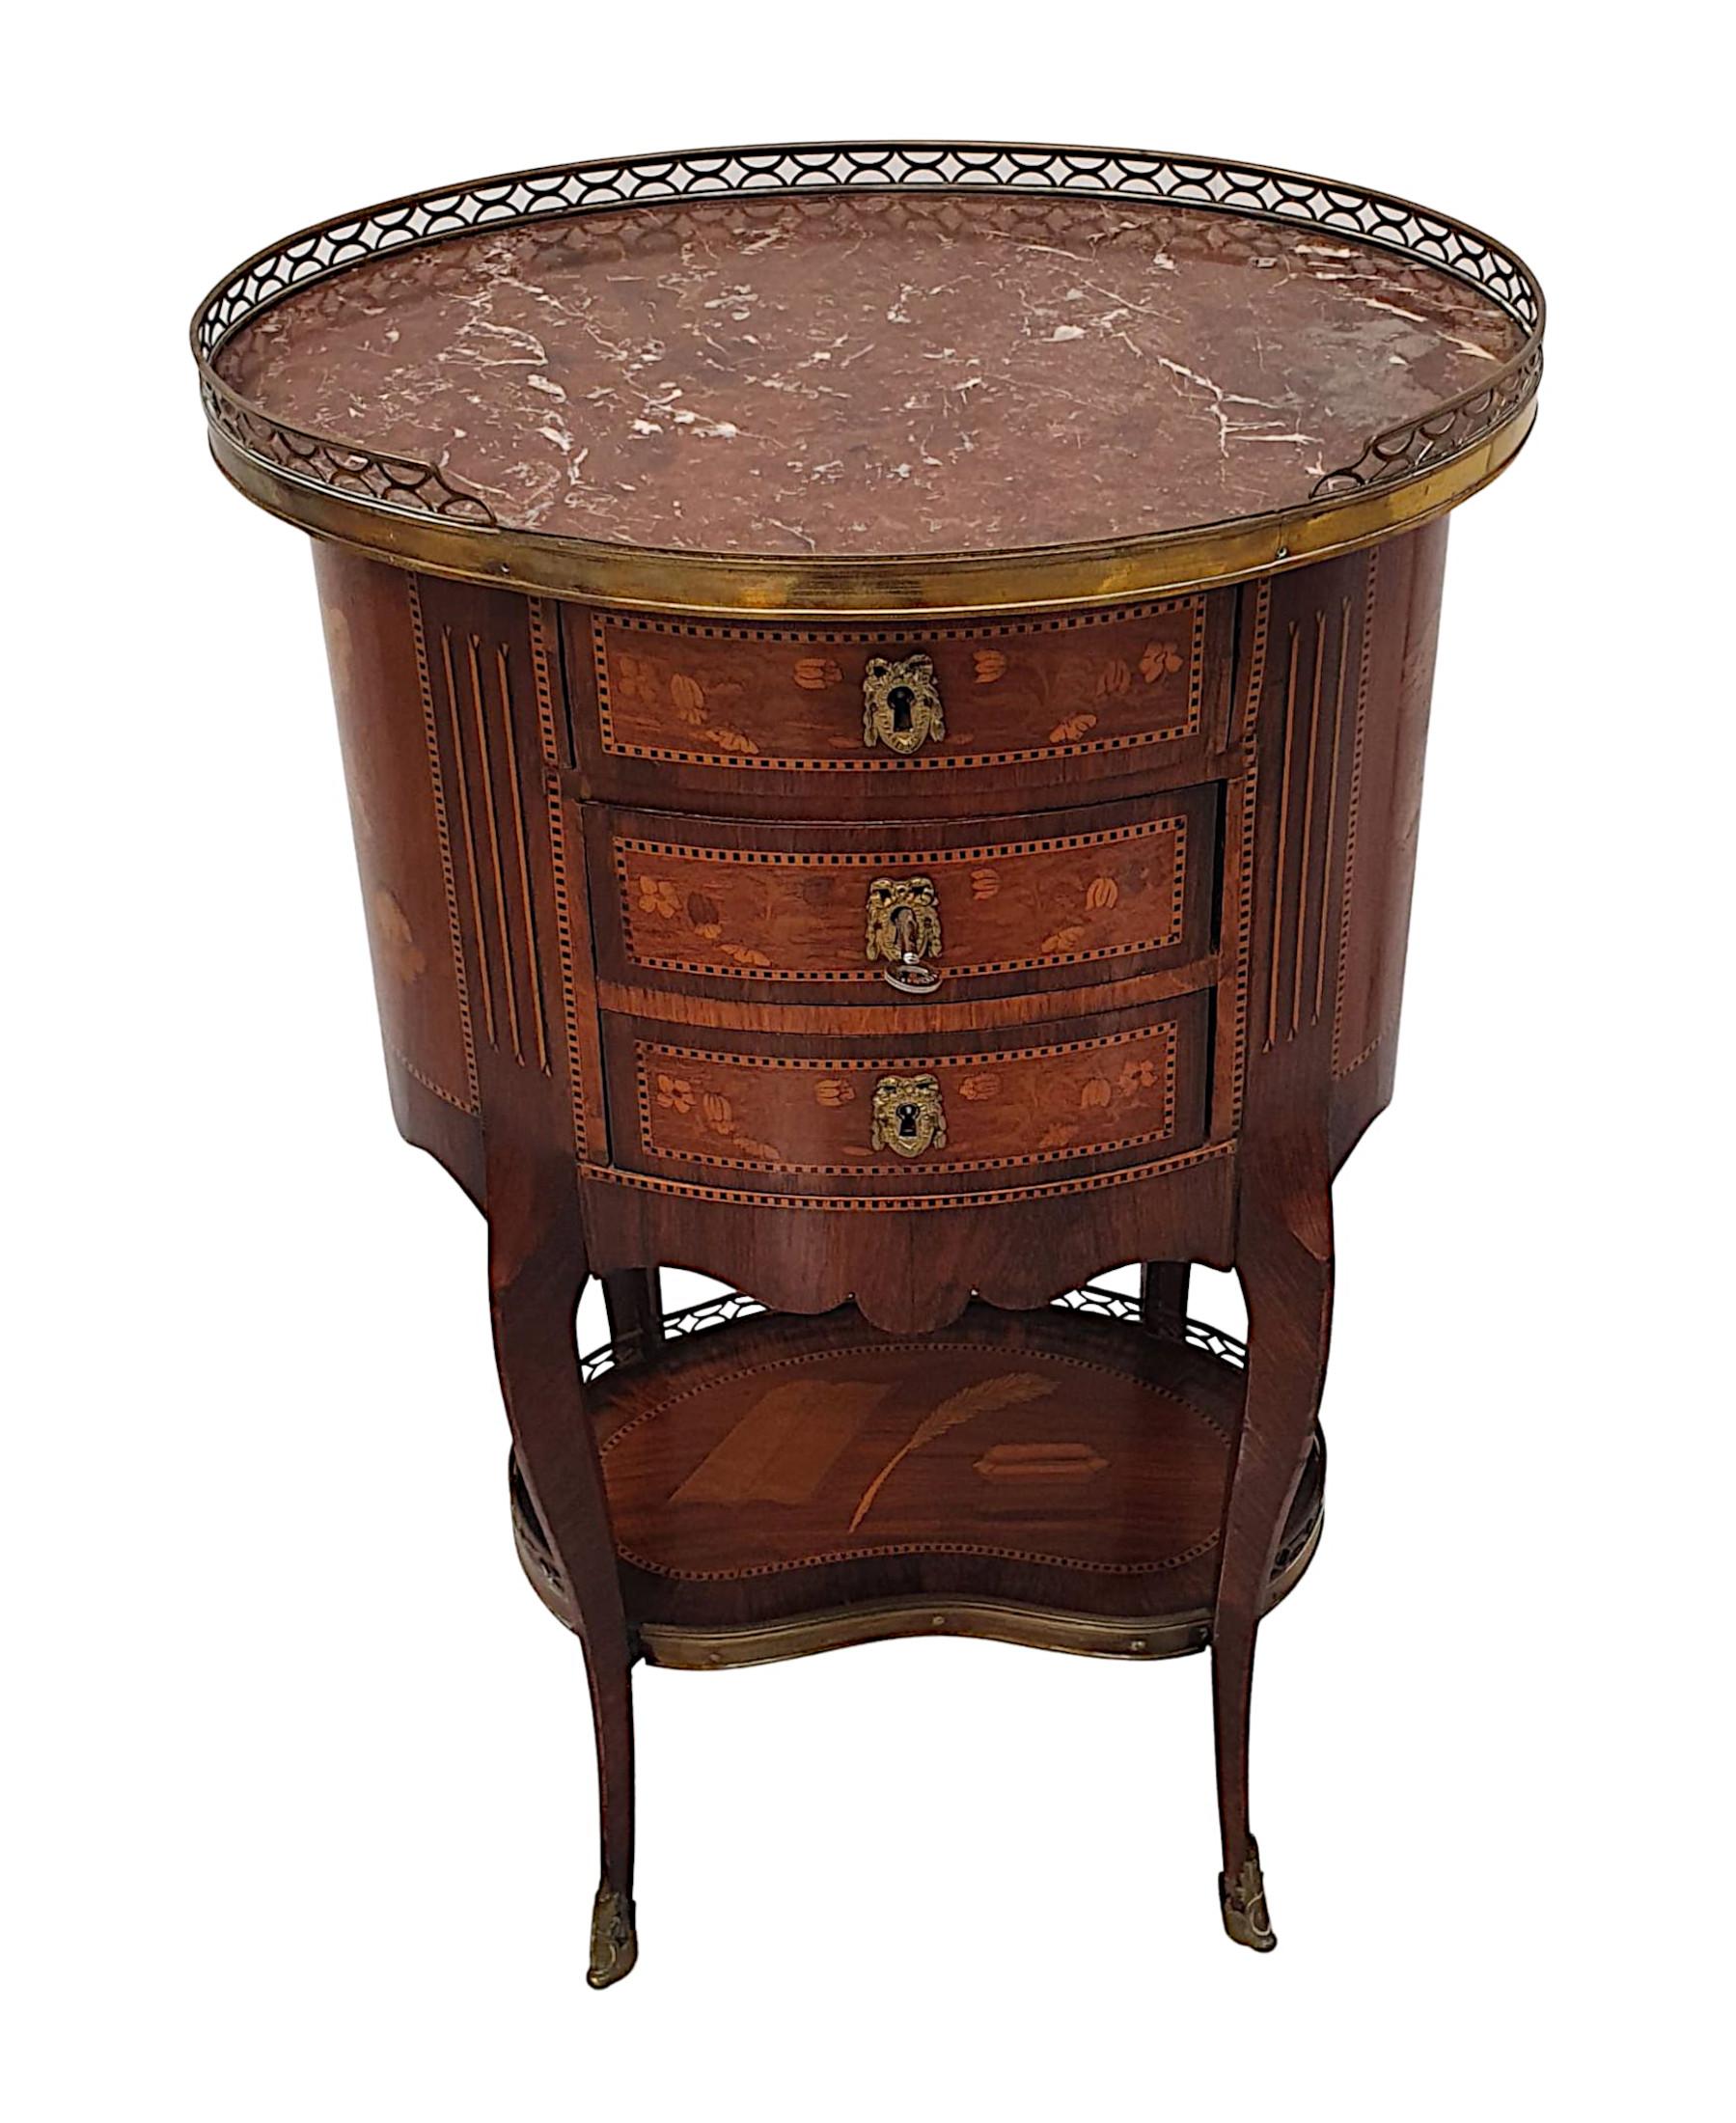 A fabulous 19th century cabinet of oval form, stunningly hand carved and with lovely patinated timbers comprising of mahogany, kingwood and fruitwood. Ormolu mounted and intricately inlaid with exquisite marquetry panels throughout, depicting